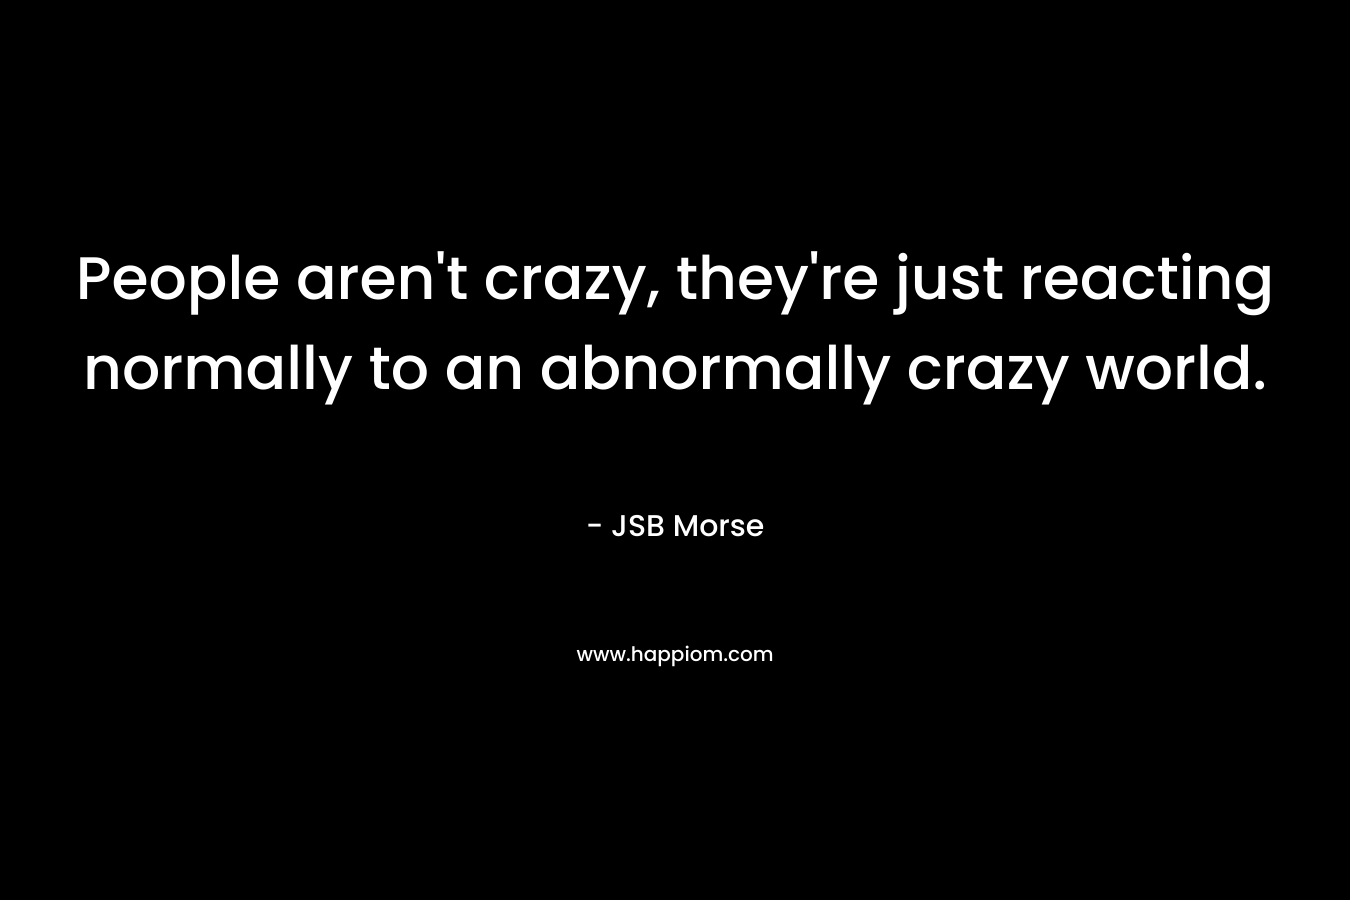 People aren't crazy, they're just reacting normally to an abnormally crazy world.